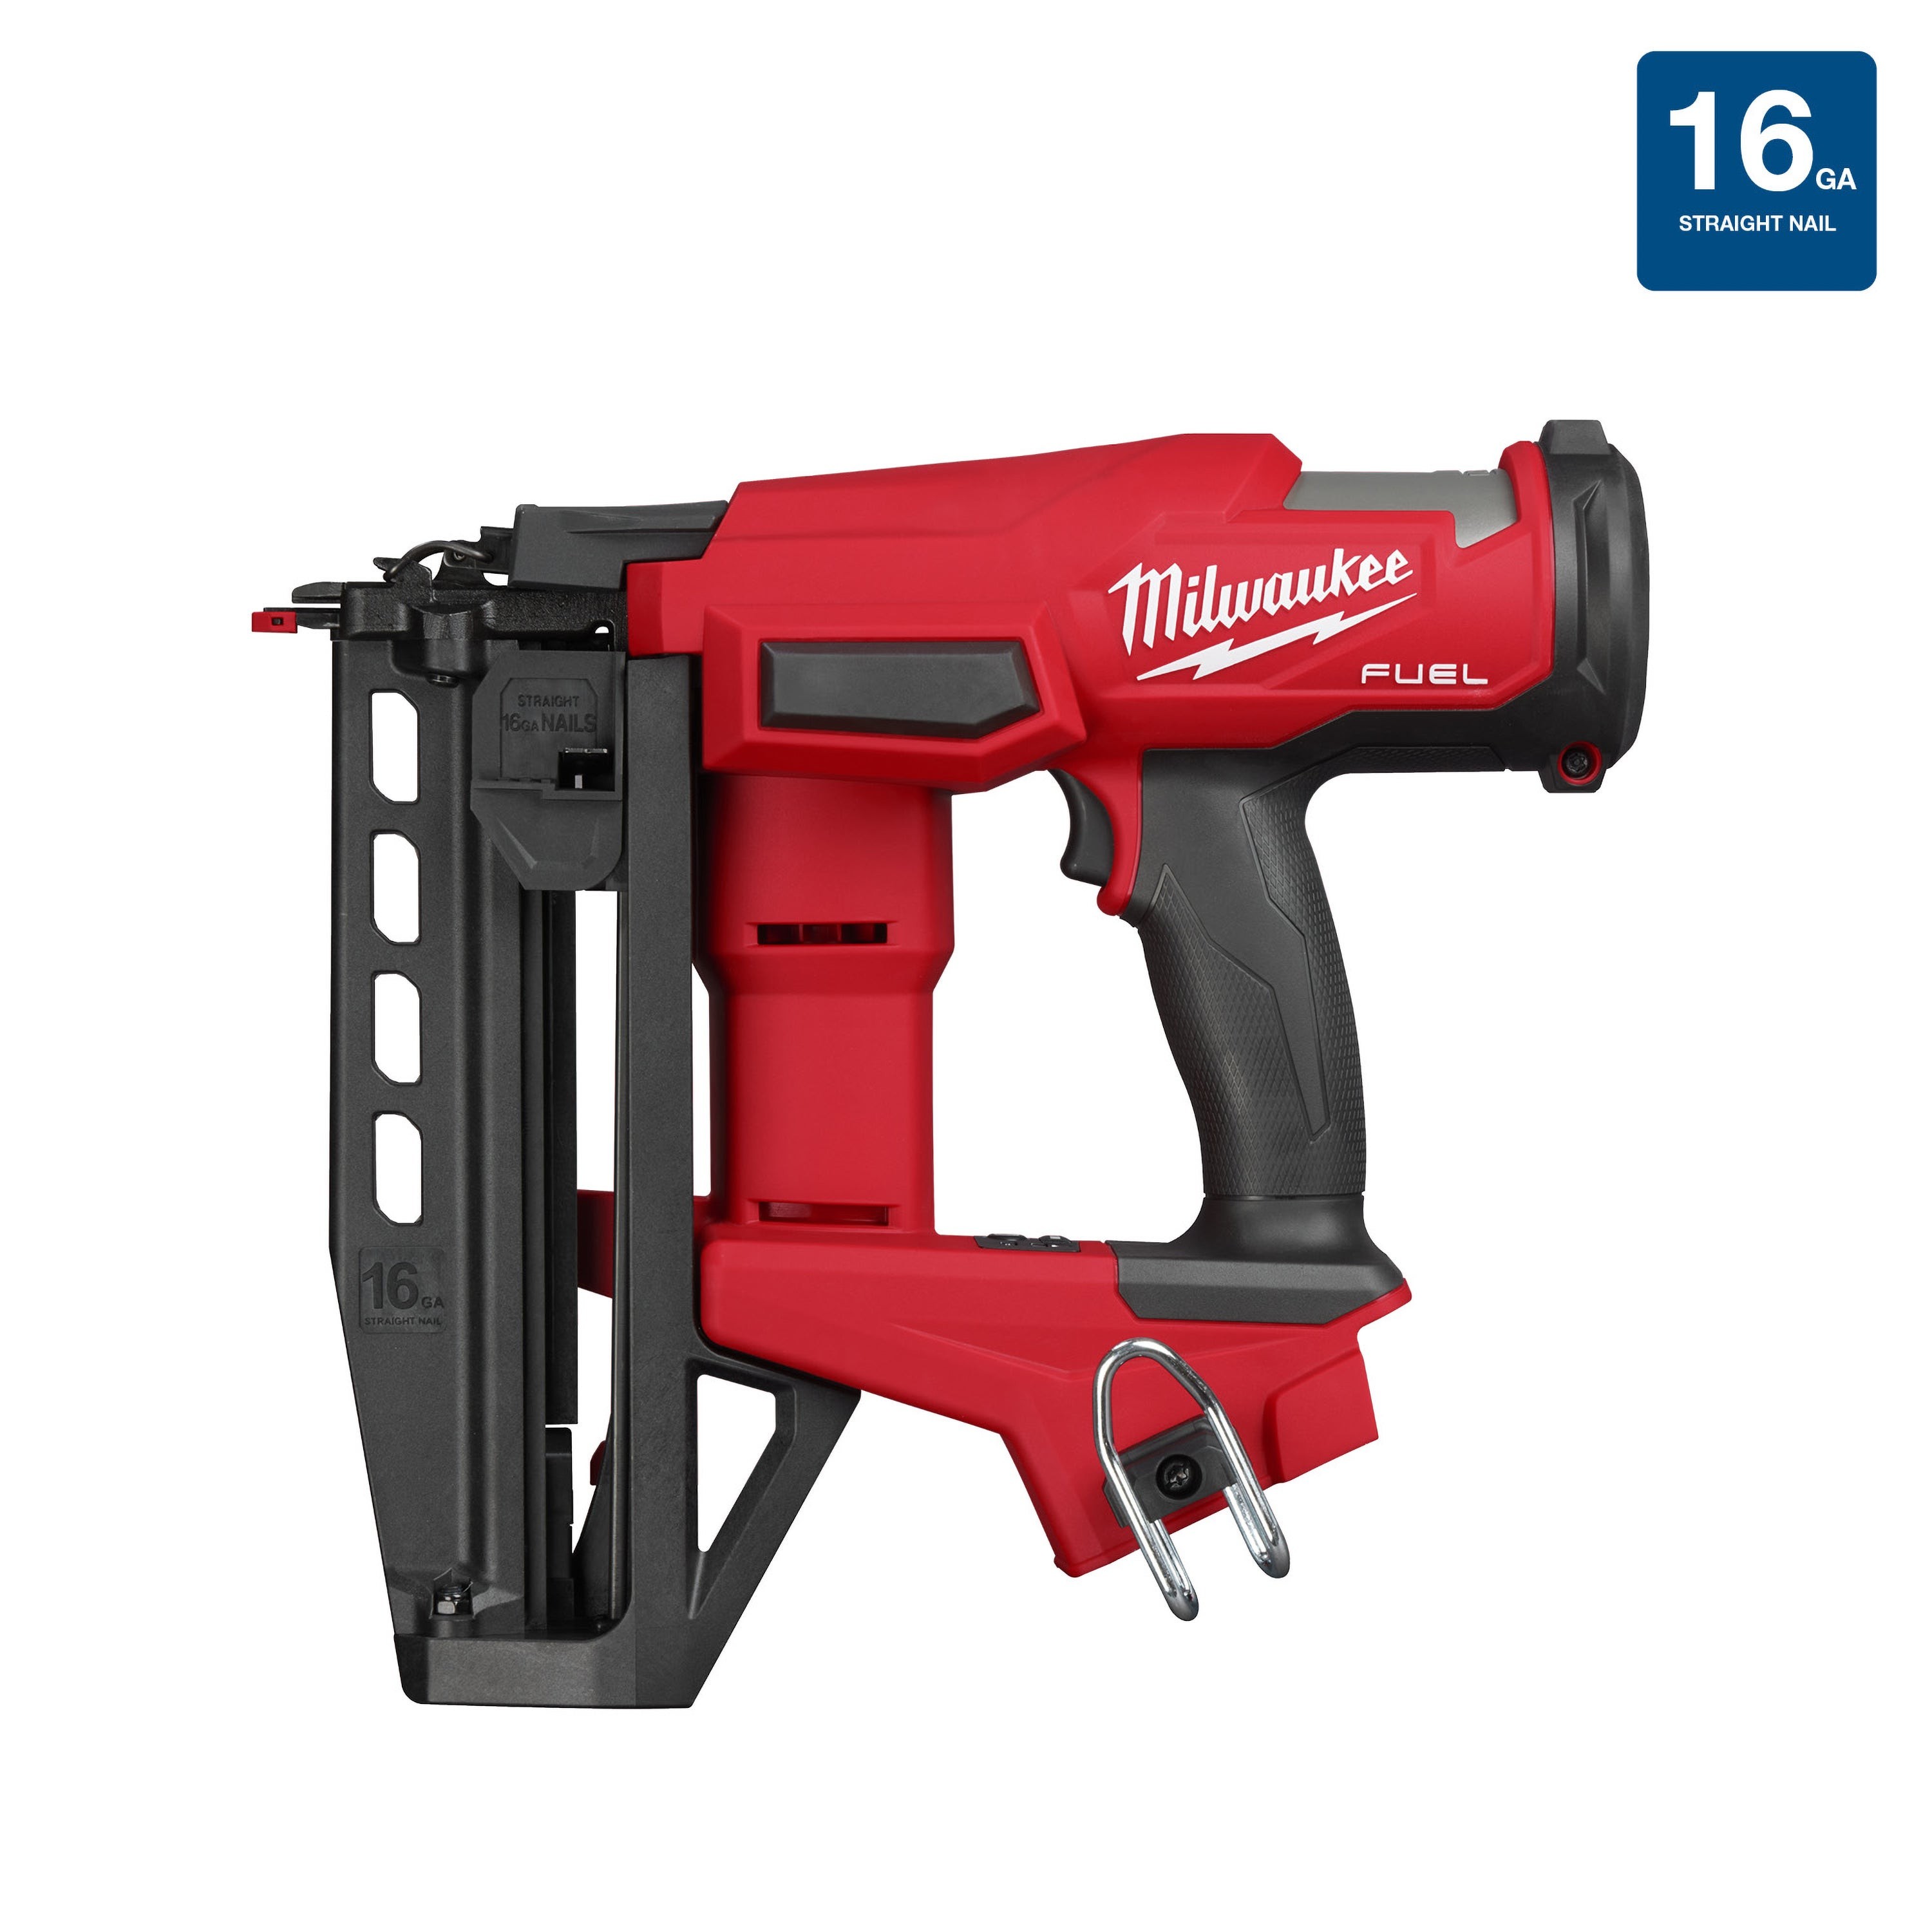 M18 FUEL 16 Gauge Straight Finish Nailer - Tool Only